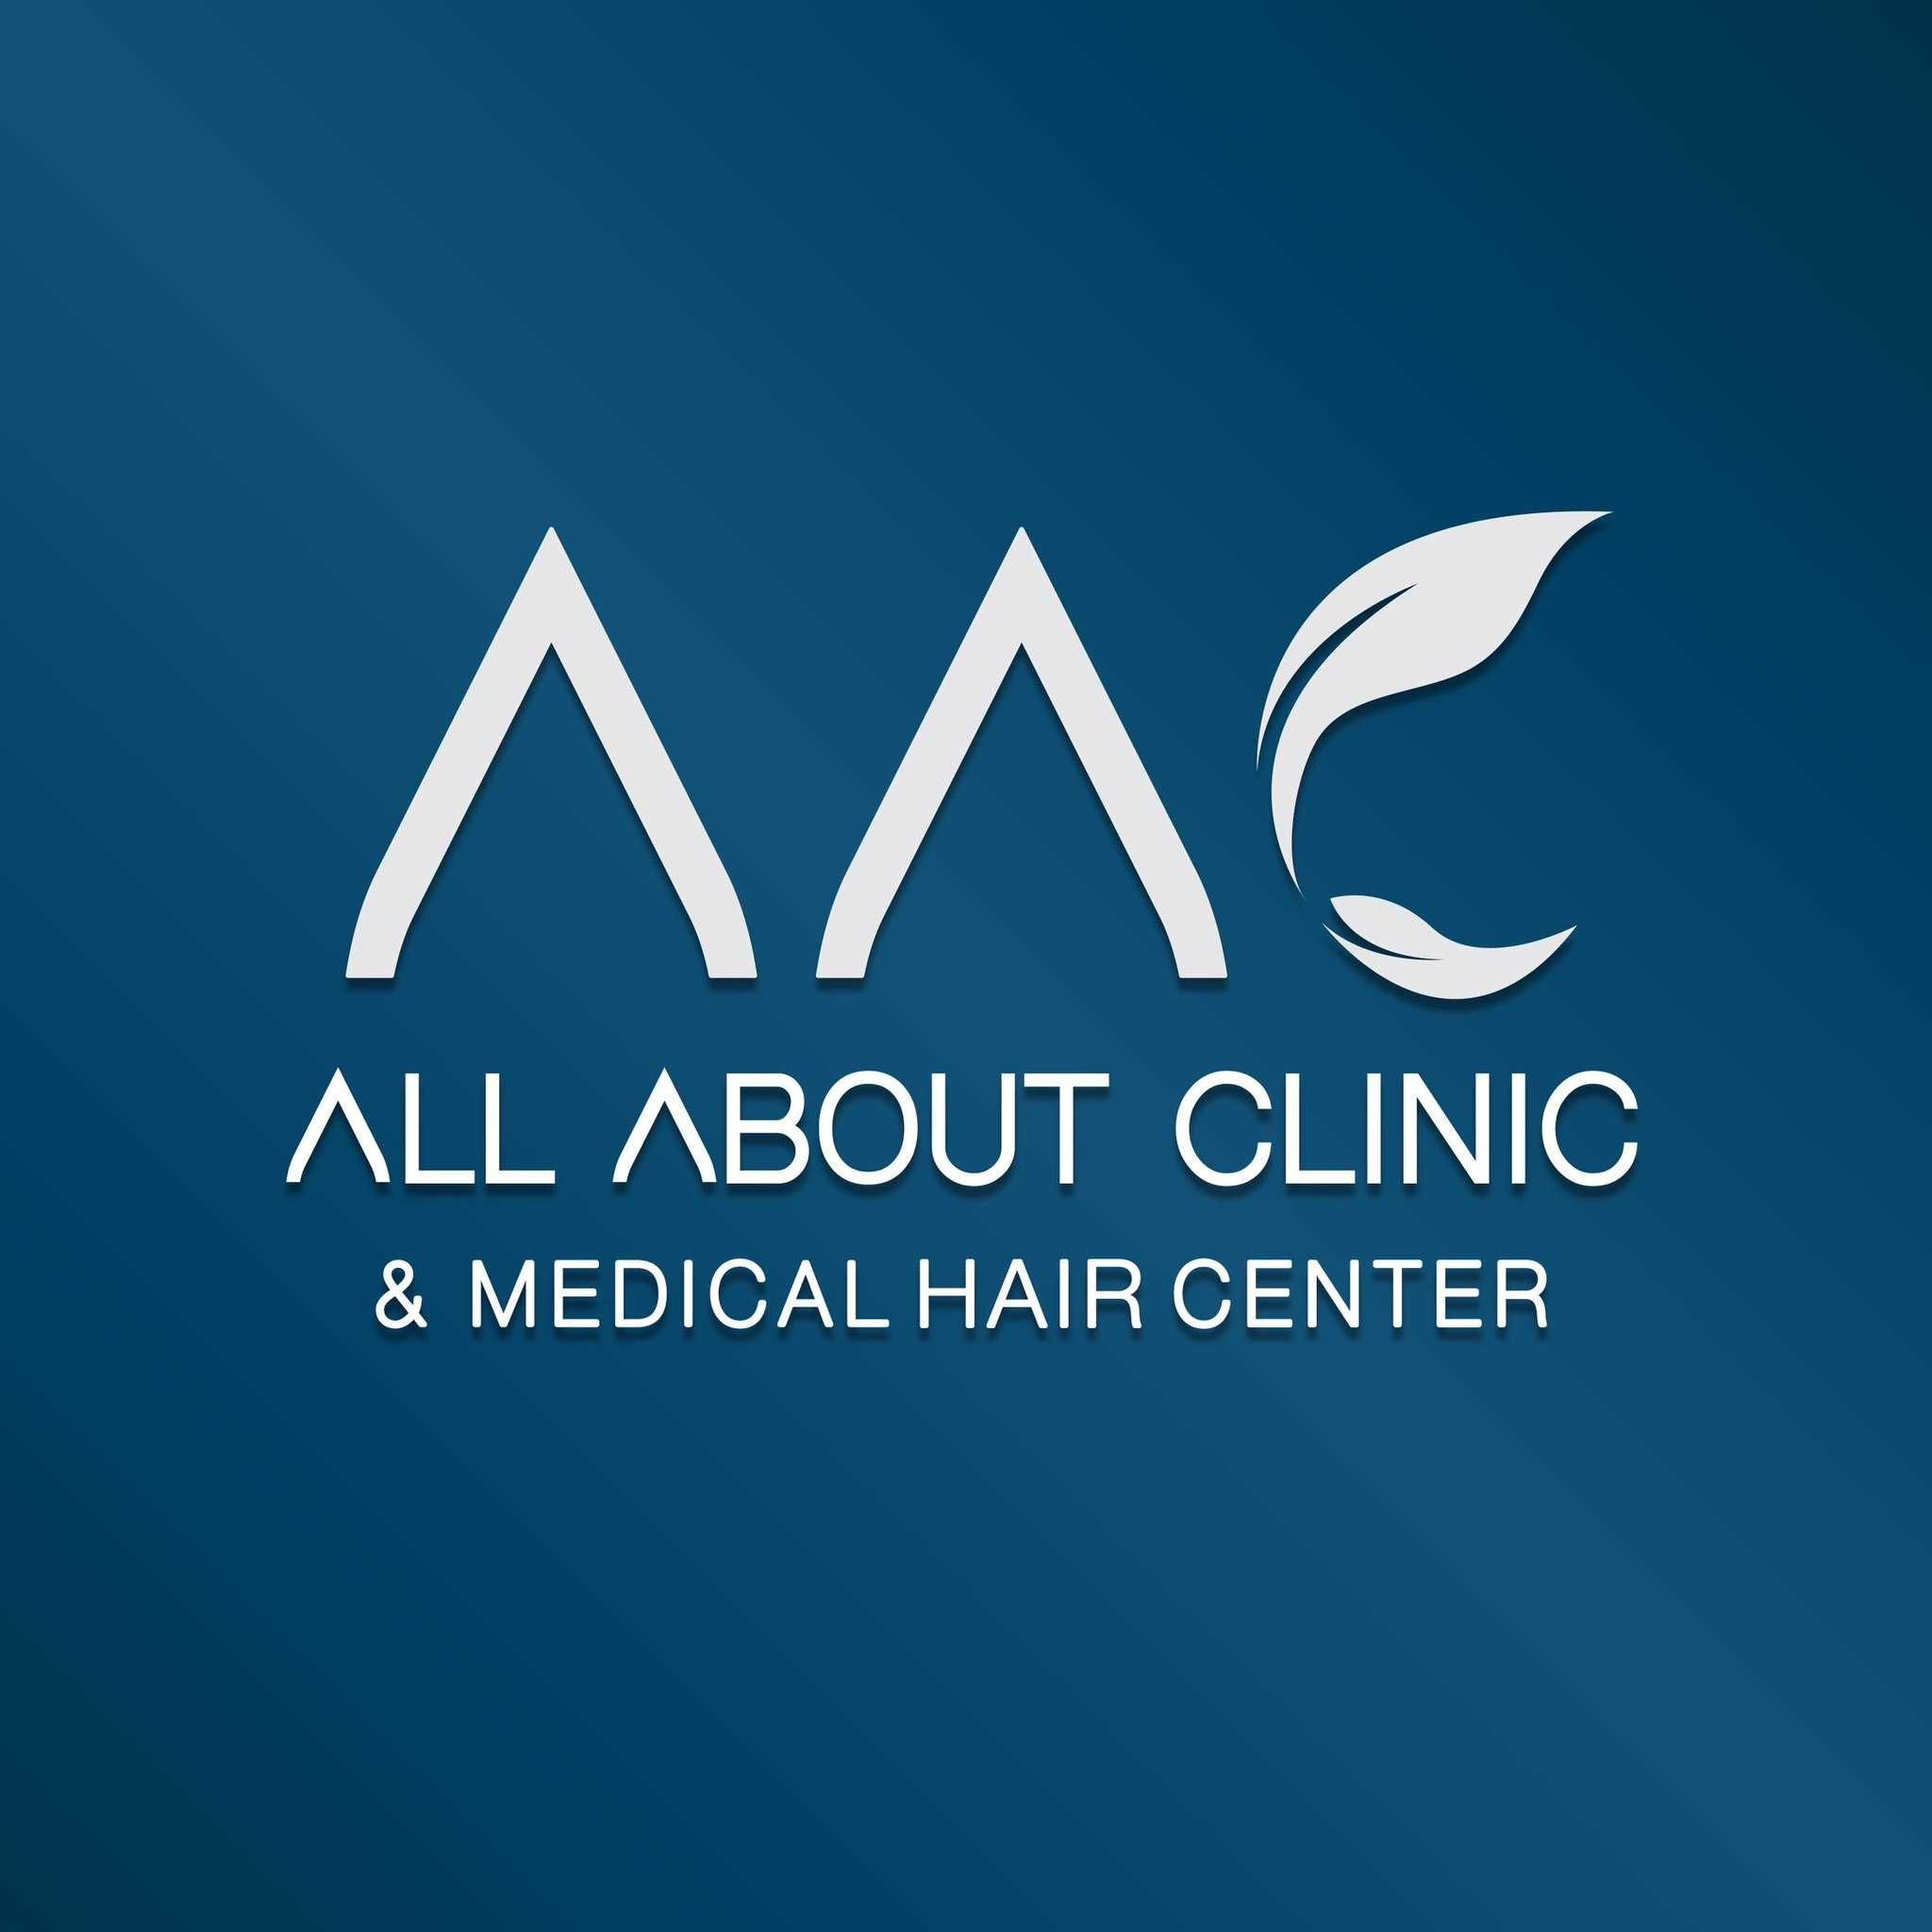 All About Clinic